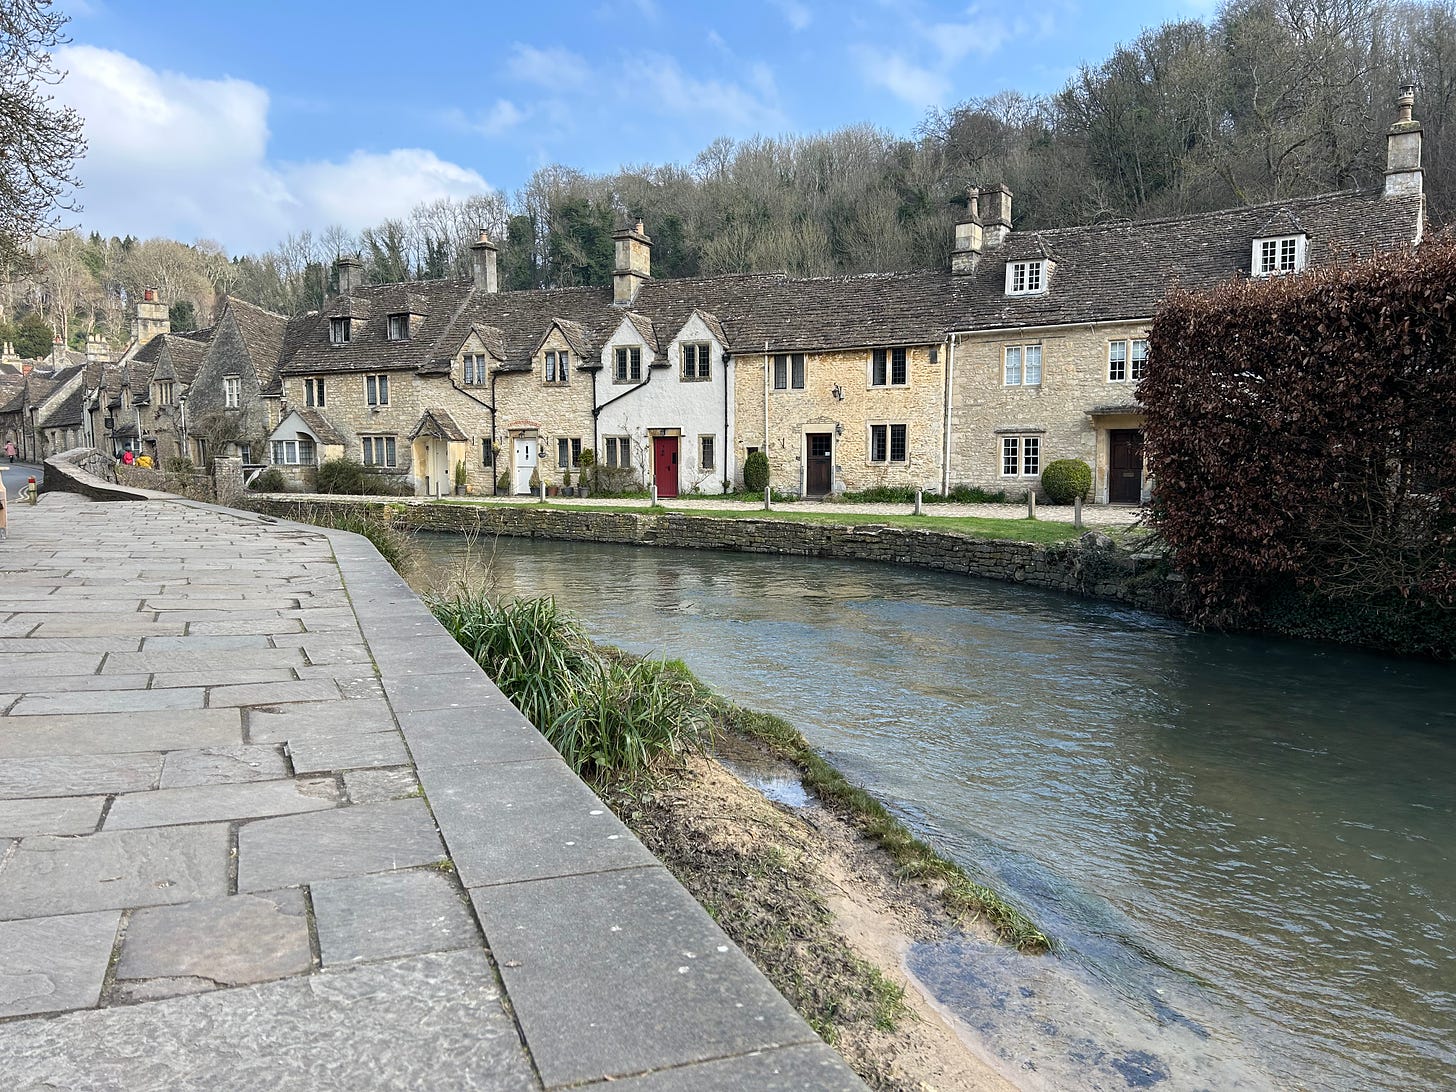 The Bybrook River flowing in front of a row of ancient stone cottages at Castle Combe, Wiltshire Image: Roland's Travels